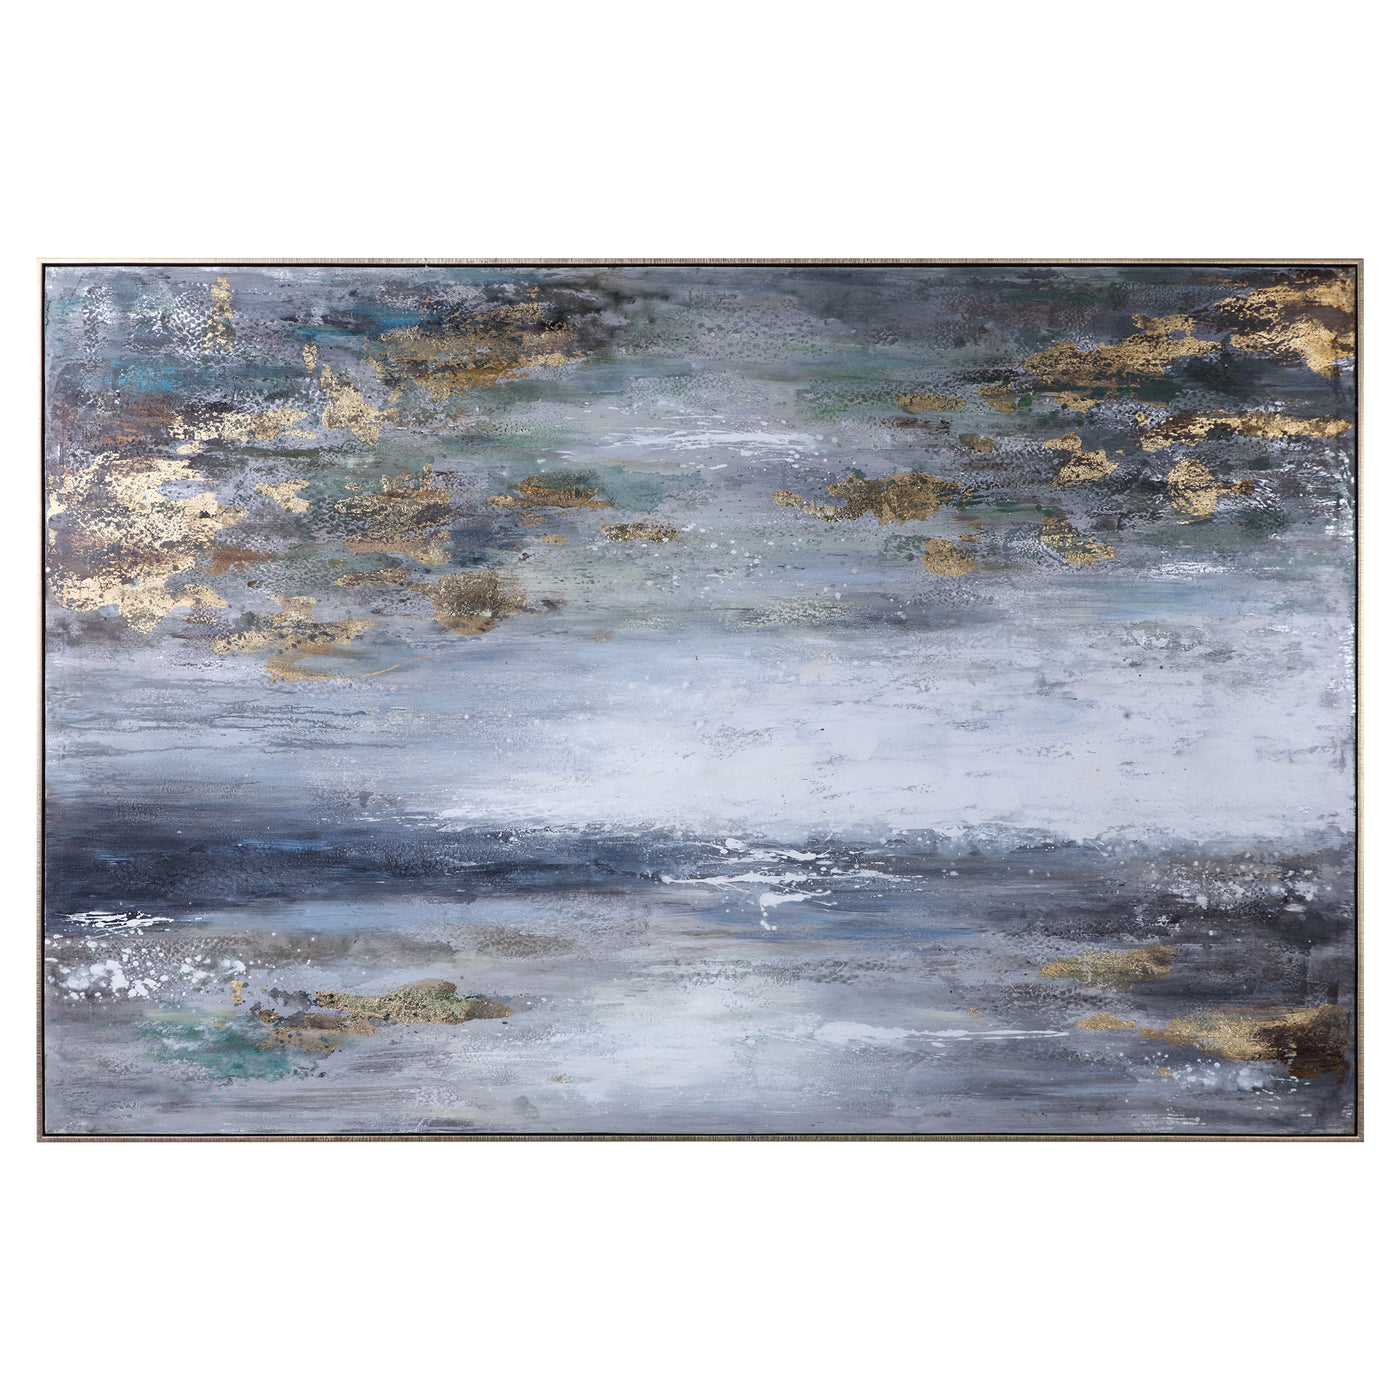 Moody Shades Of Gray And White Work Together To Create This Abstract Landscape Artwork. The Hand Painted Canvas Is Accente...